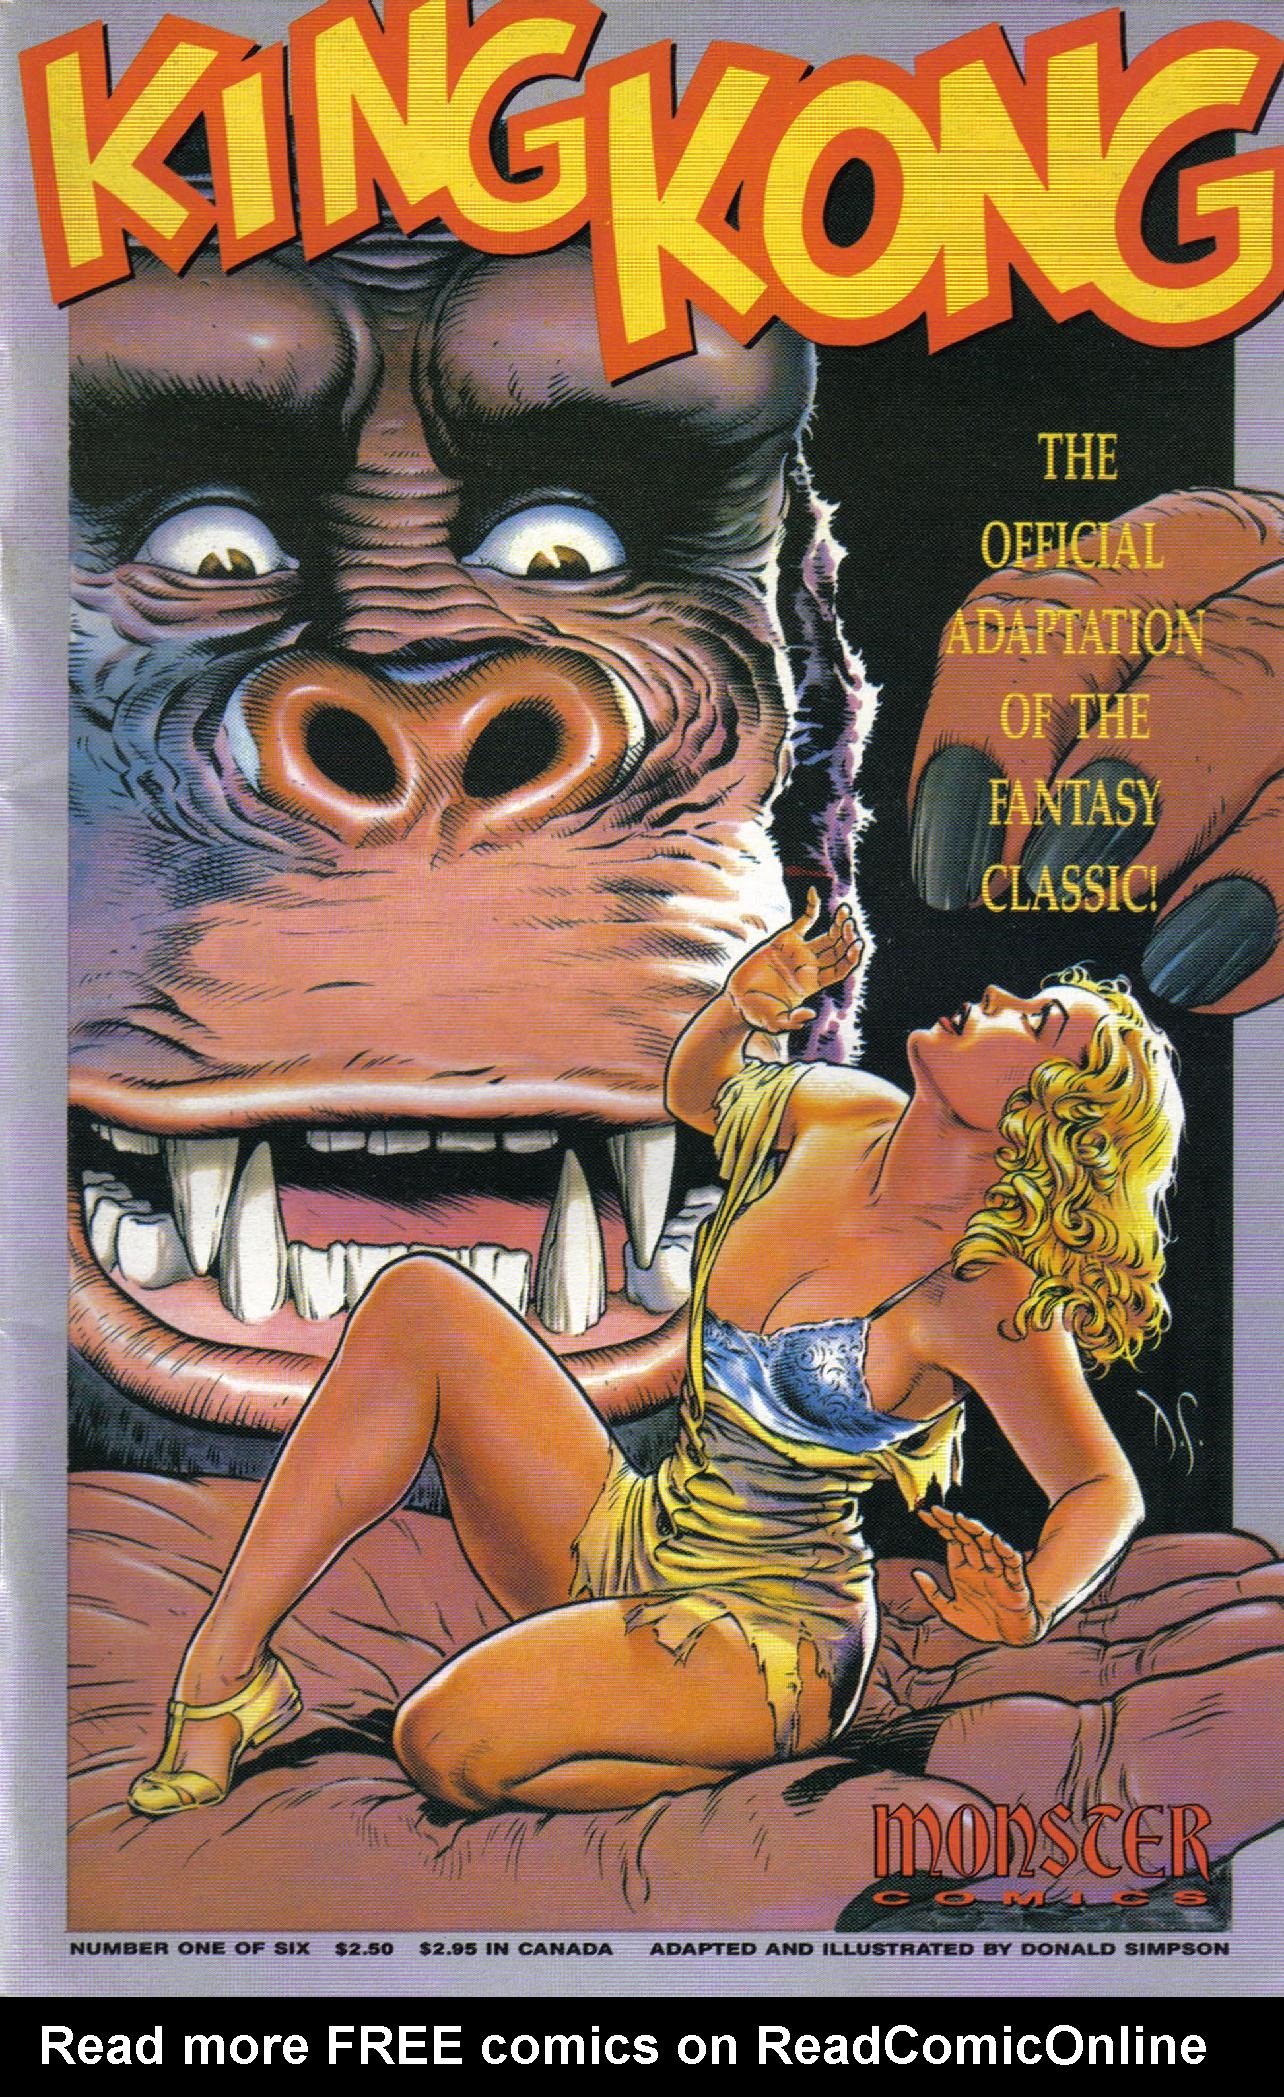 King Kong 1991 Issue 1 | Read King Kong 1991 Issue 1 comic online in high  quality. Read Full Comic online for free - Read comics online in high  quality .|viewcomiconline.com